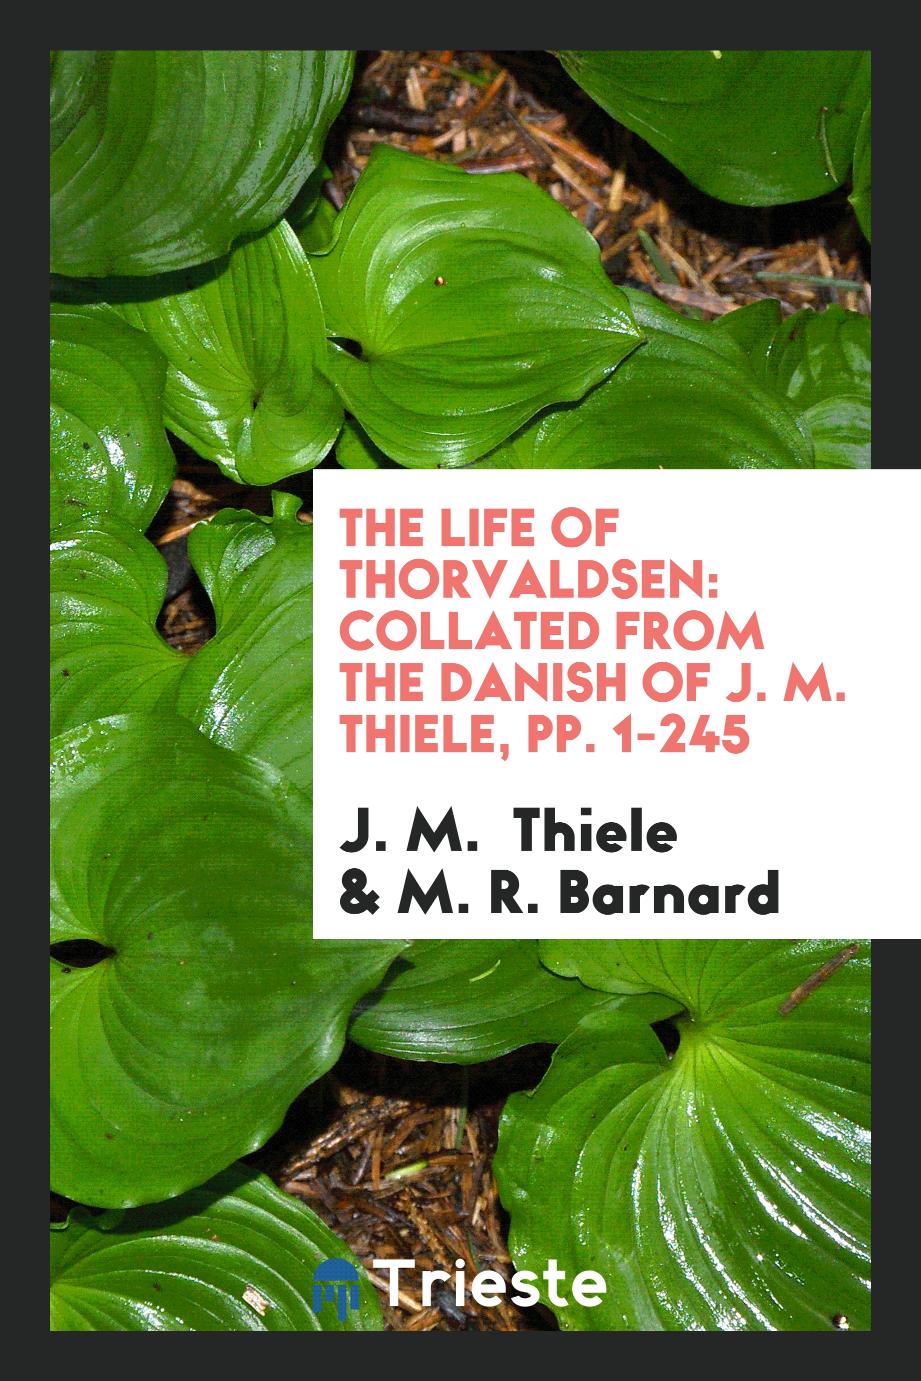 The Life of Thorvaldsen: Collated from the Danish of J. M. Thiele, pp. 1-245